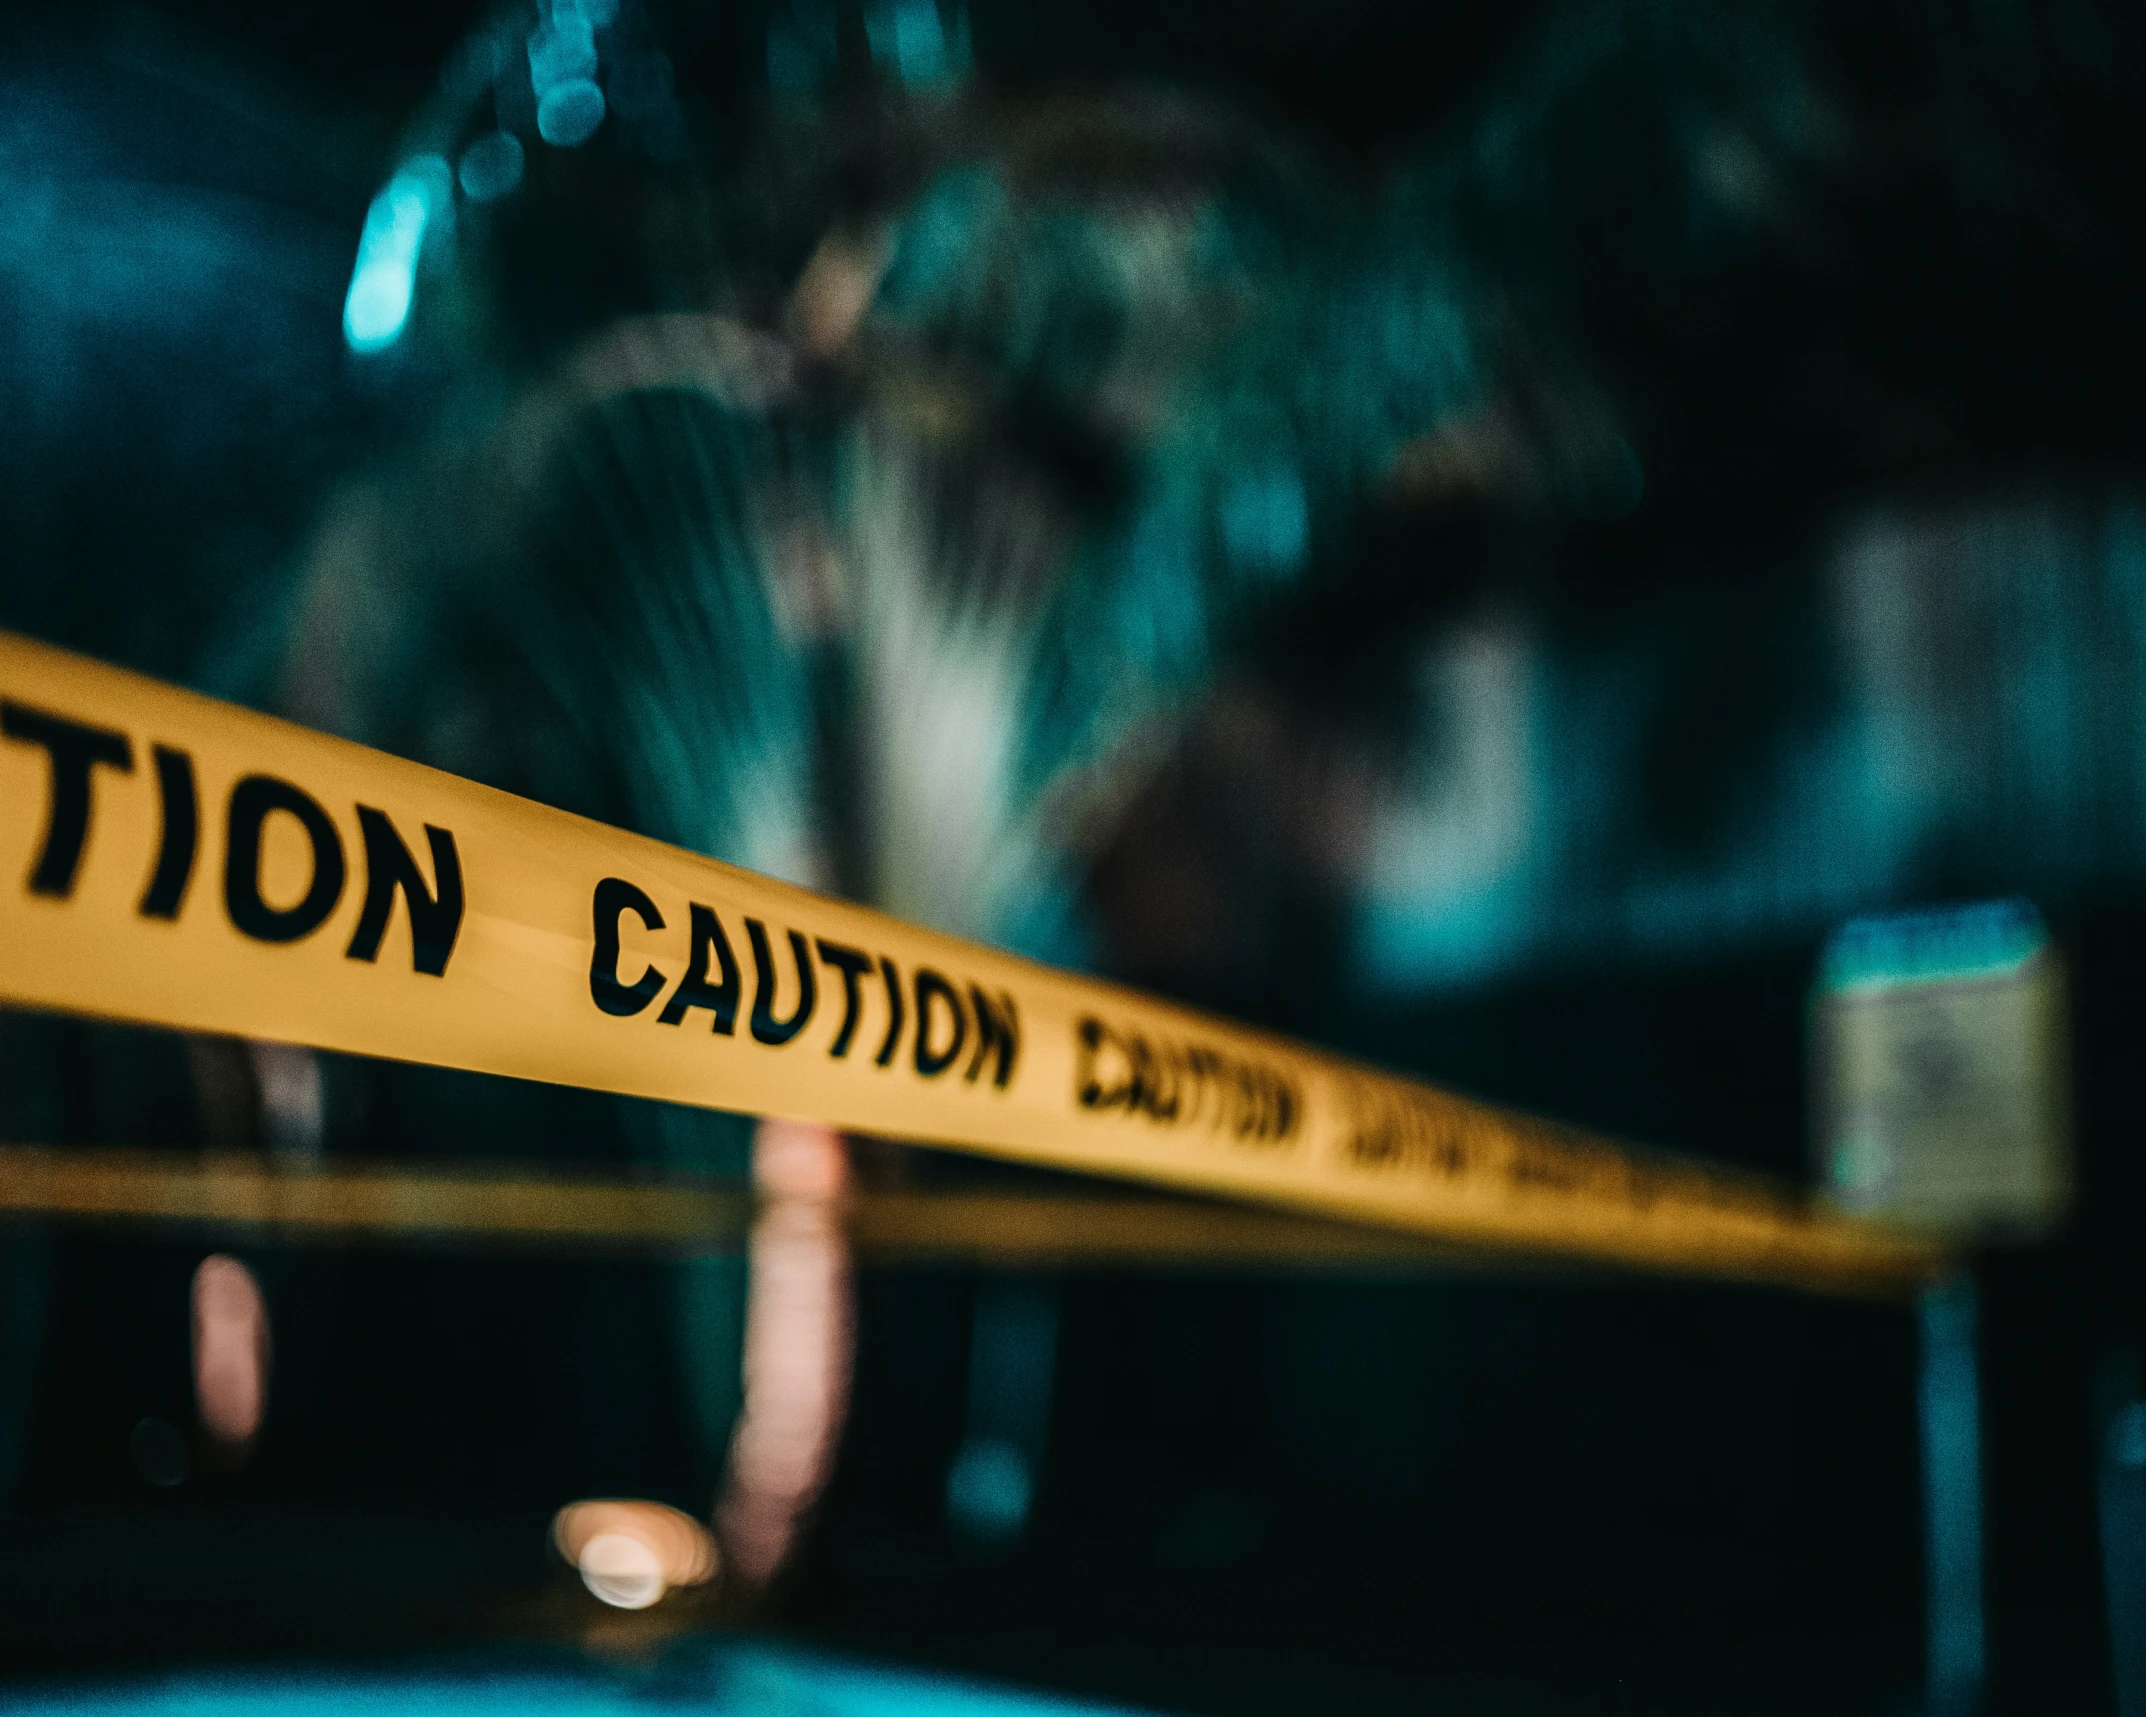 the caution line of a crime scene in focus